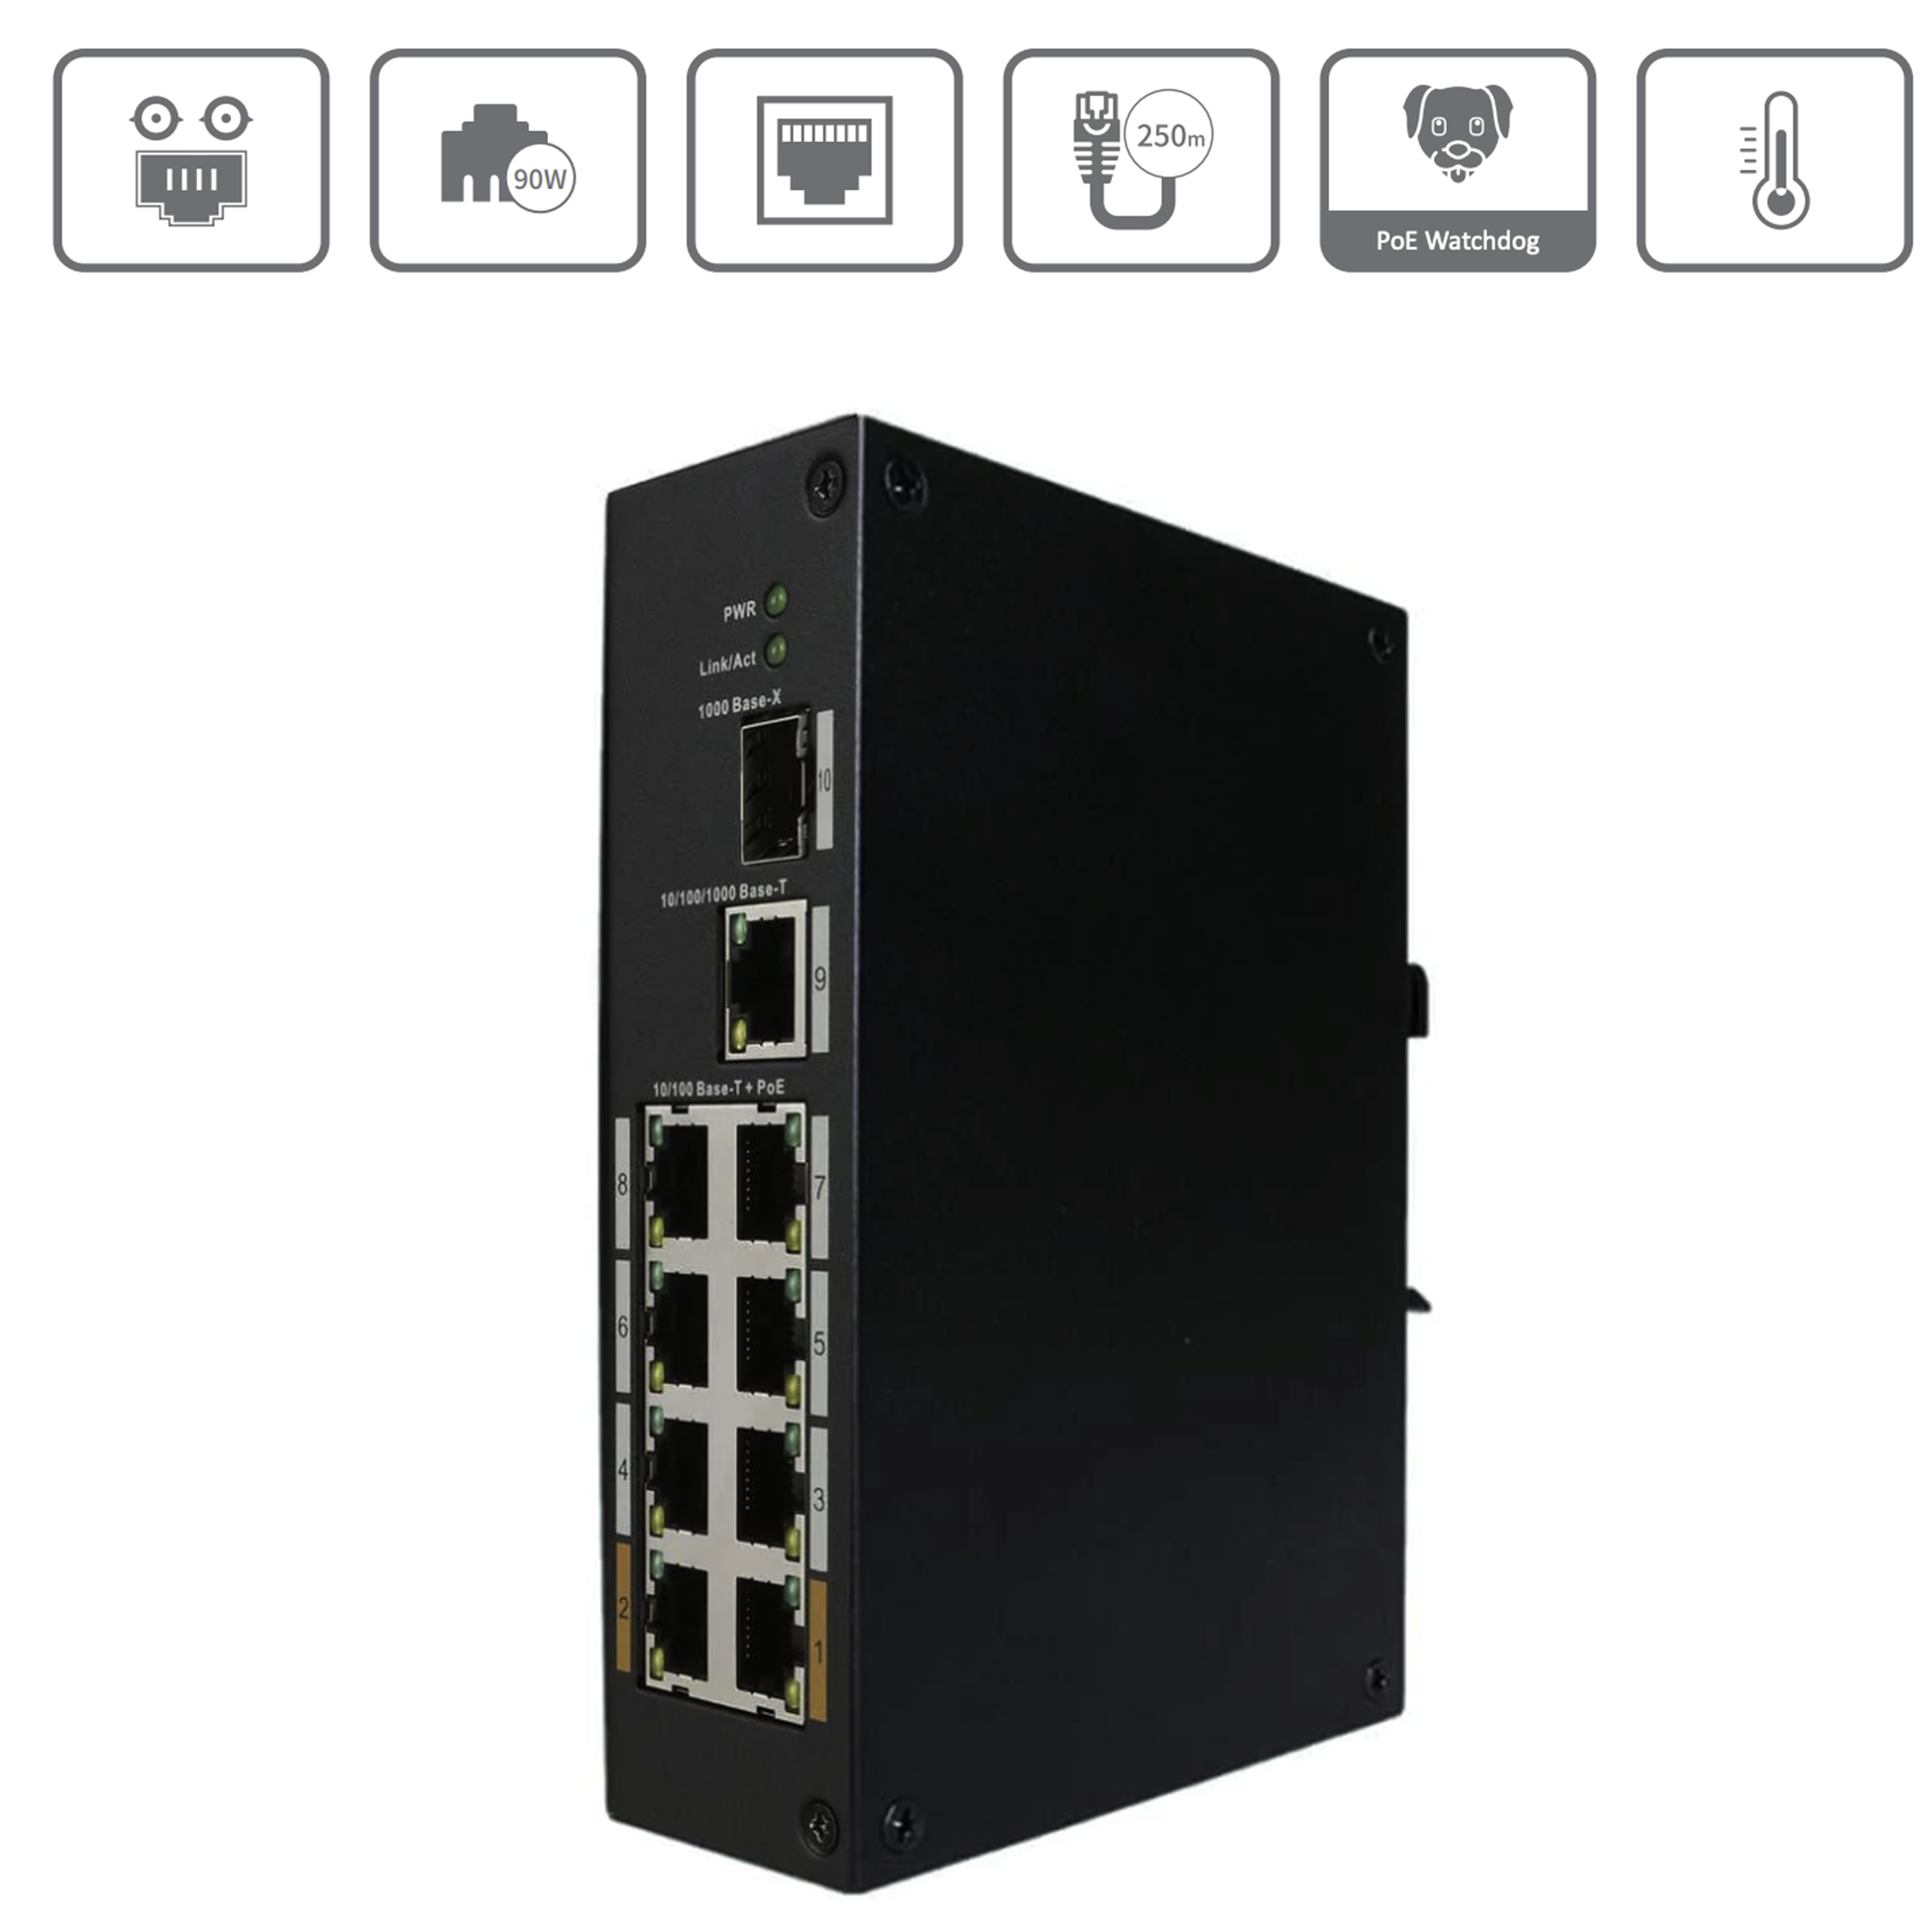 8 Channel/ 8 Port PoE+ Switch for IP Cameras - MAS08P096H-X - Montavue